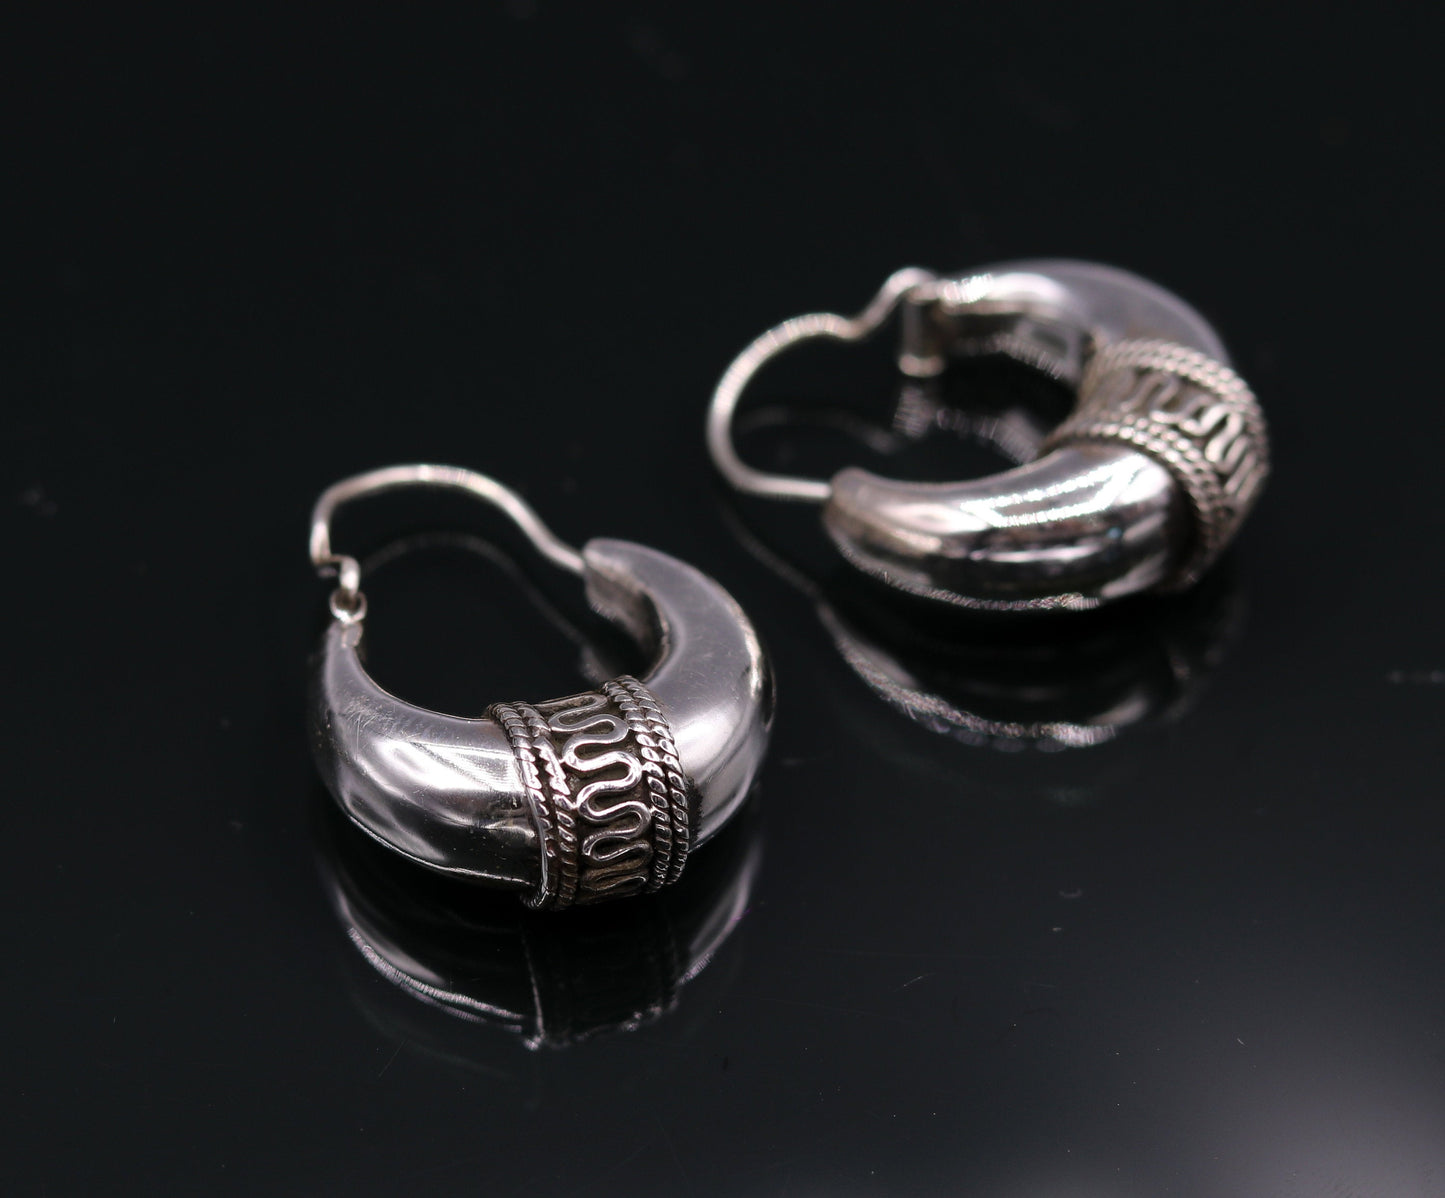 Pure 925 sterling silver handmade vintage ethnic style hoops earrings kundal,ethnic pretty bali tribal belly dance jewelry from india s591 - TRIBAL ORNAMENTS